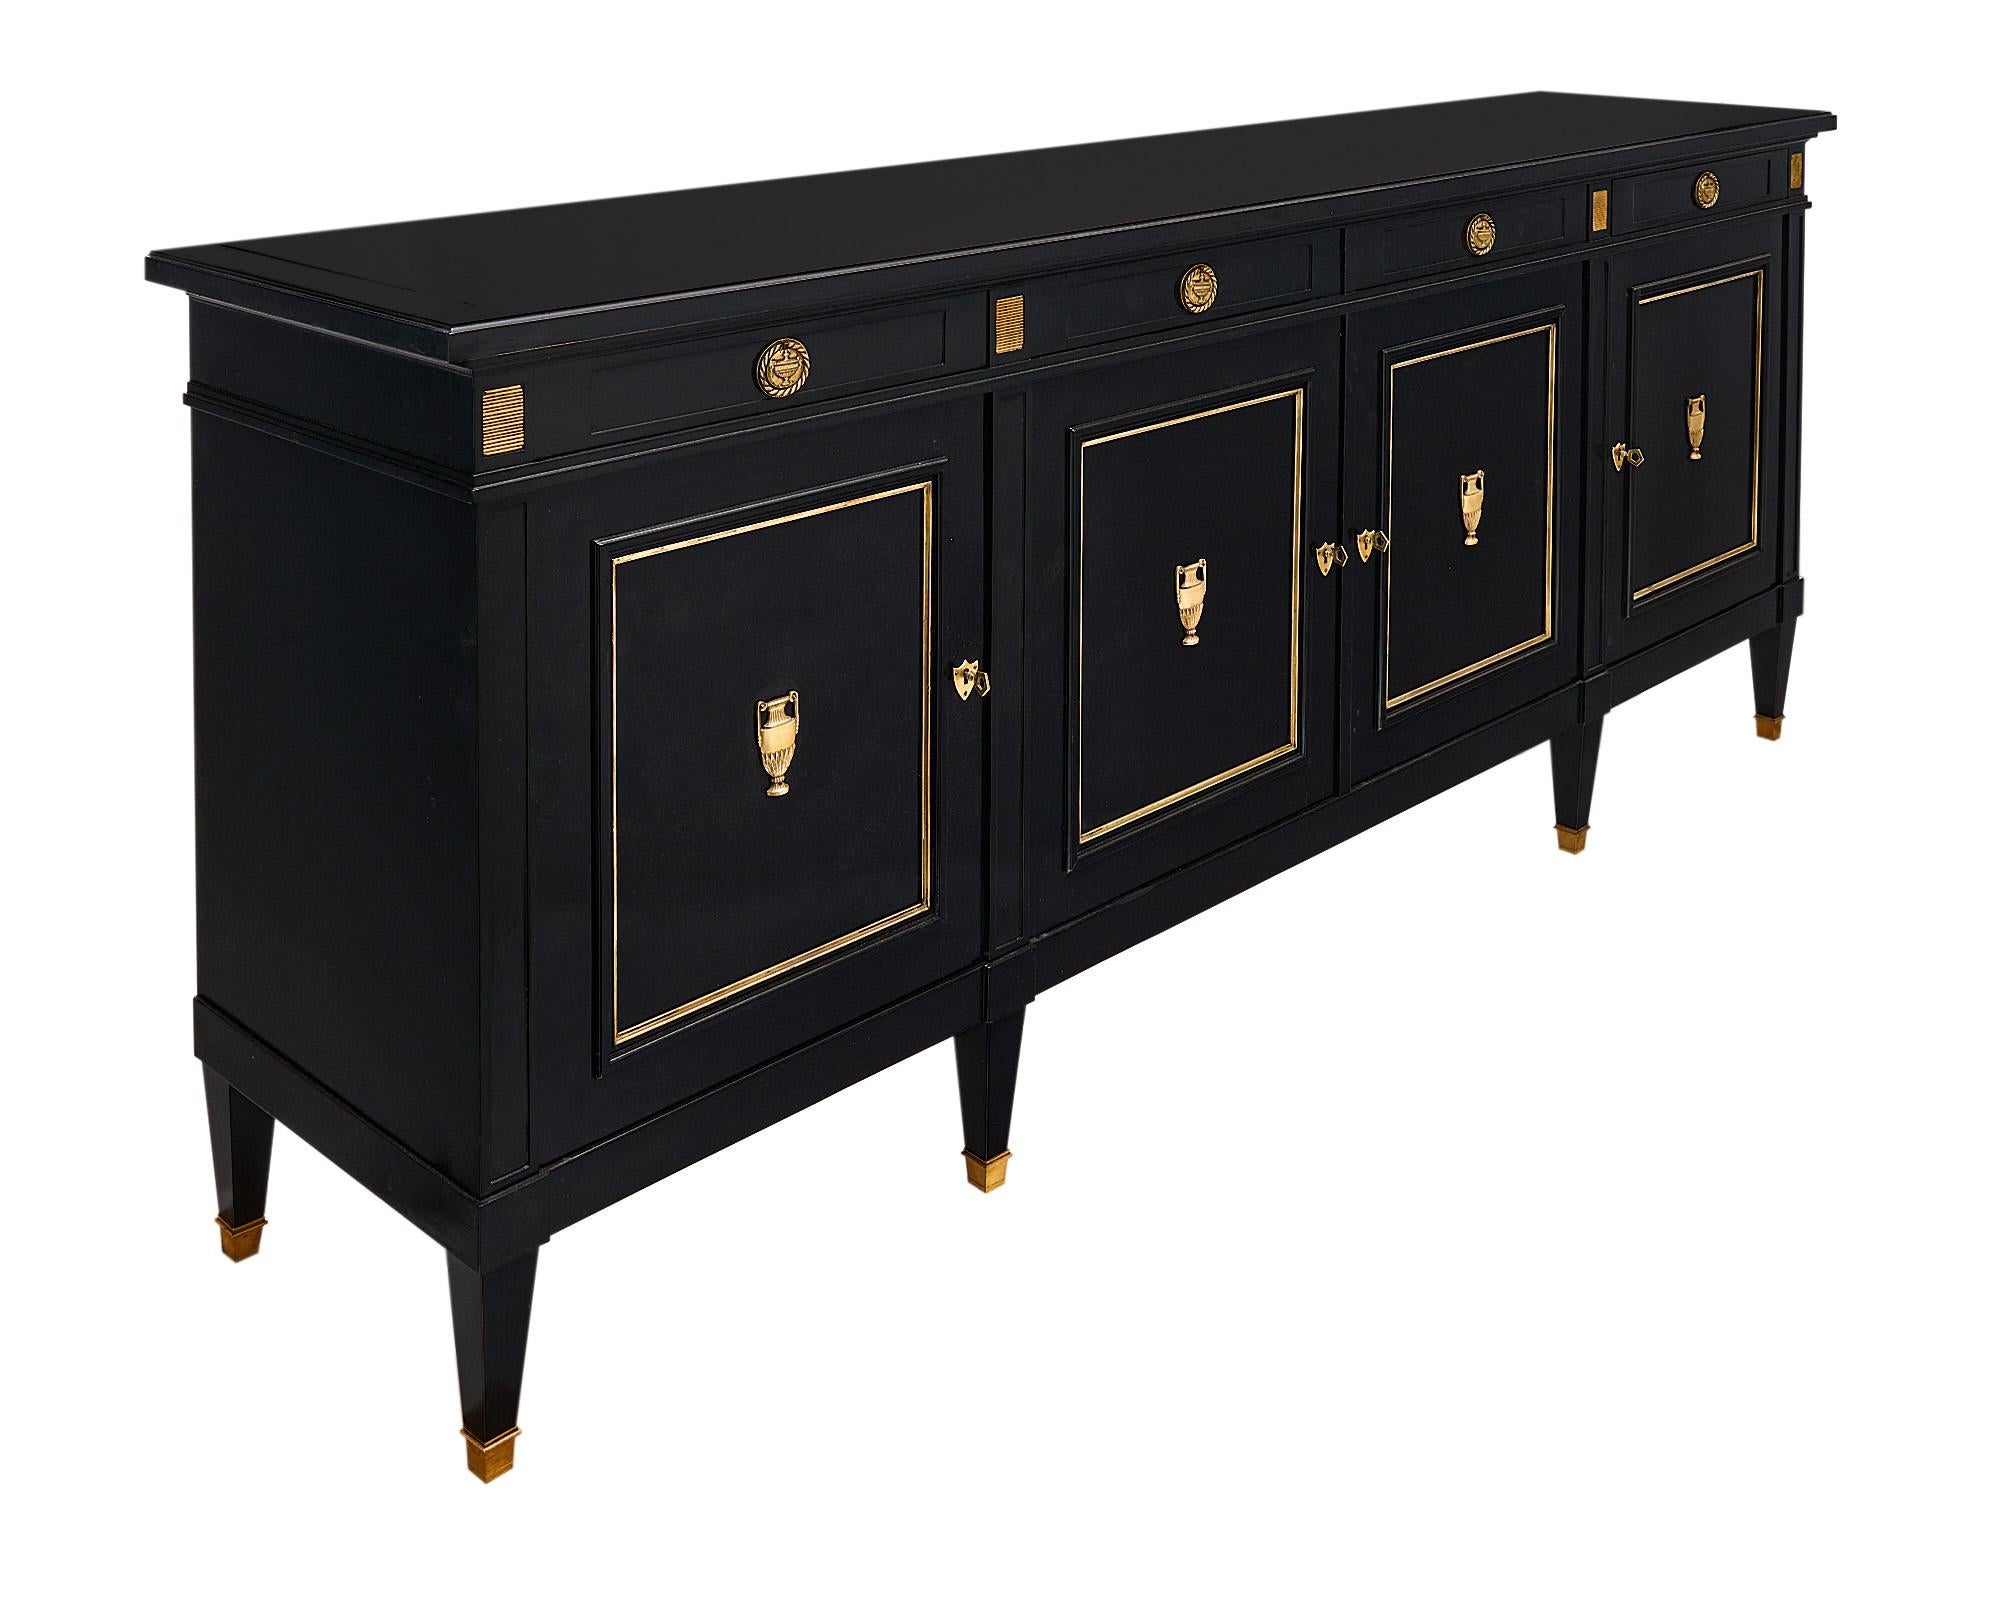 This impressive French Antique Grand Buffet/Enfilade, crafted in the Directoire style, comes from Lyon in the Rhone Valley. It showcases a magnificent neoclassical design with four dovetailed drawers and four doors revealing adjustable shelves.